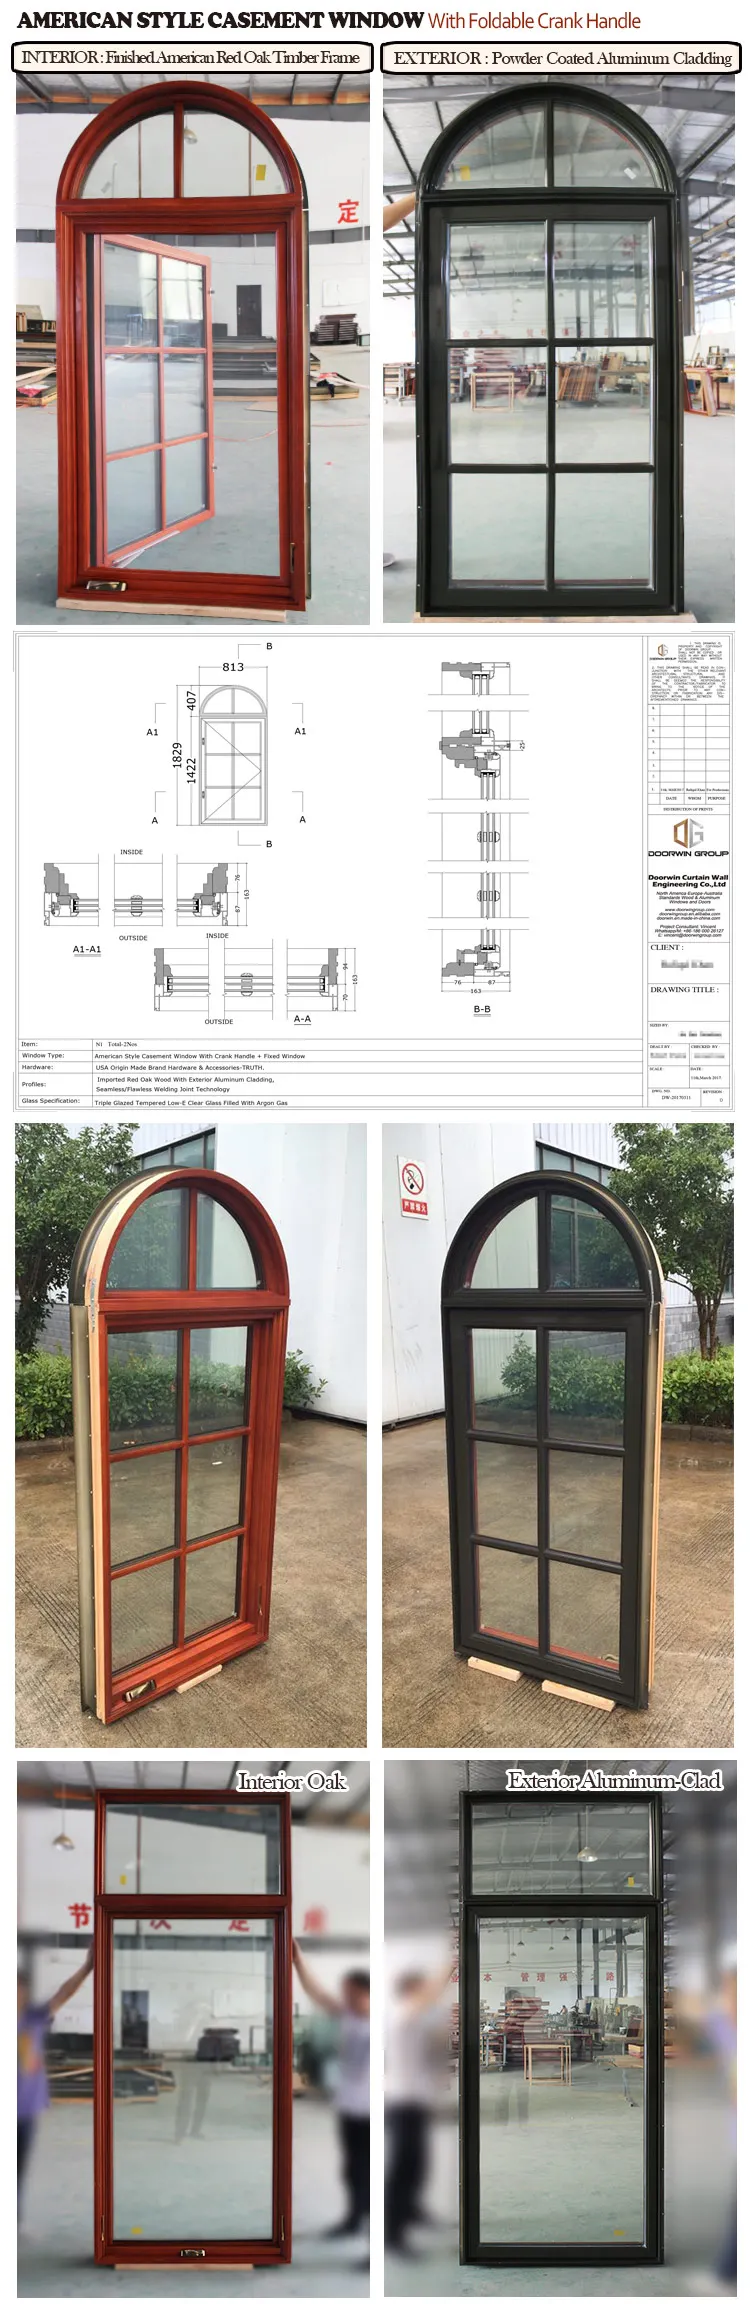 NAMI Certified American Crank Hinged Window  with double glass